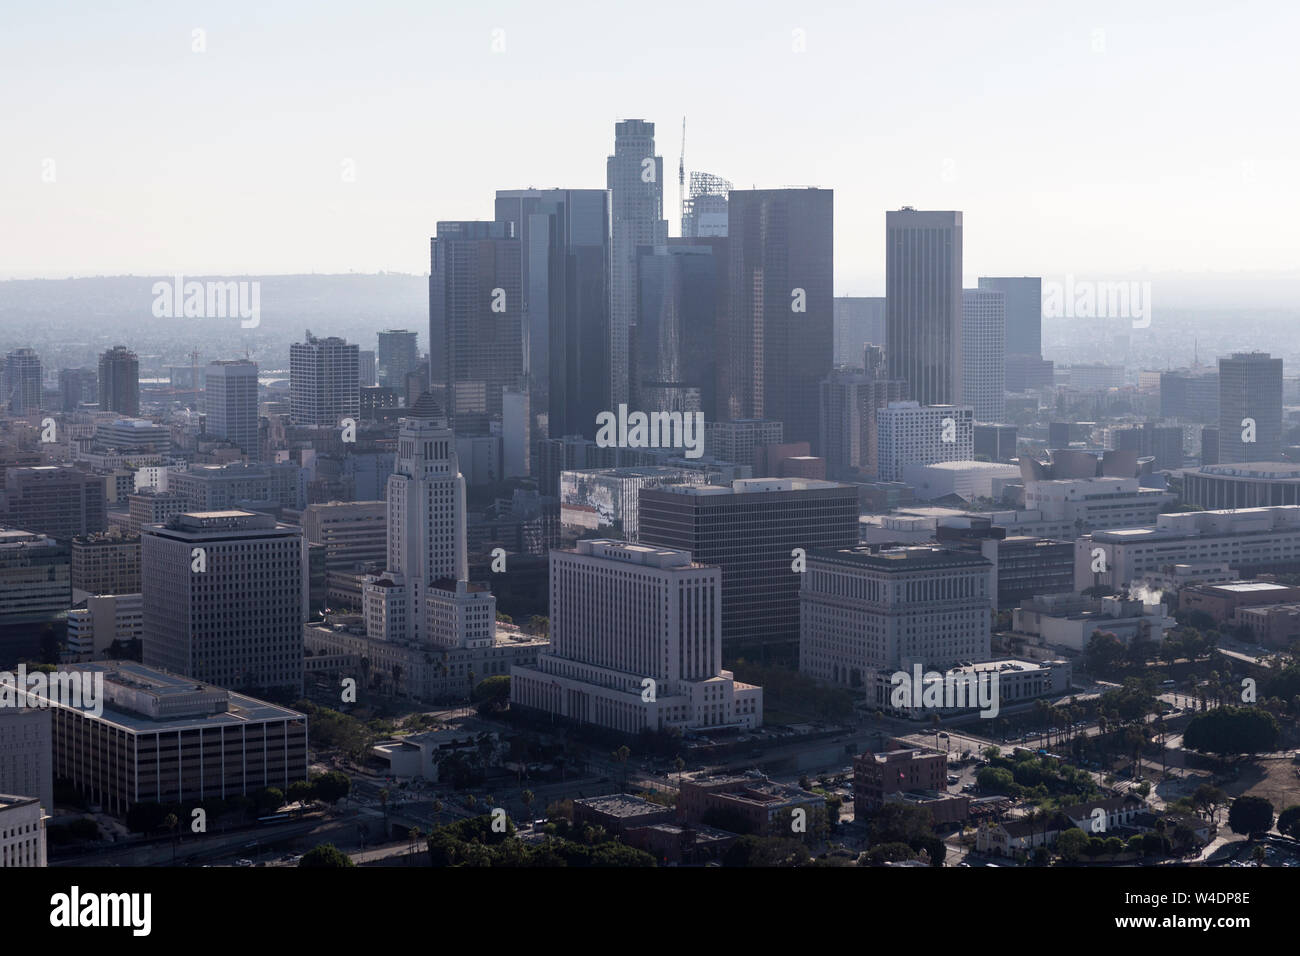 Smoggy afternoon aerial of buildings and streets in downtown Los Angeles, California. Stock Photo